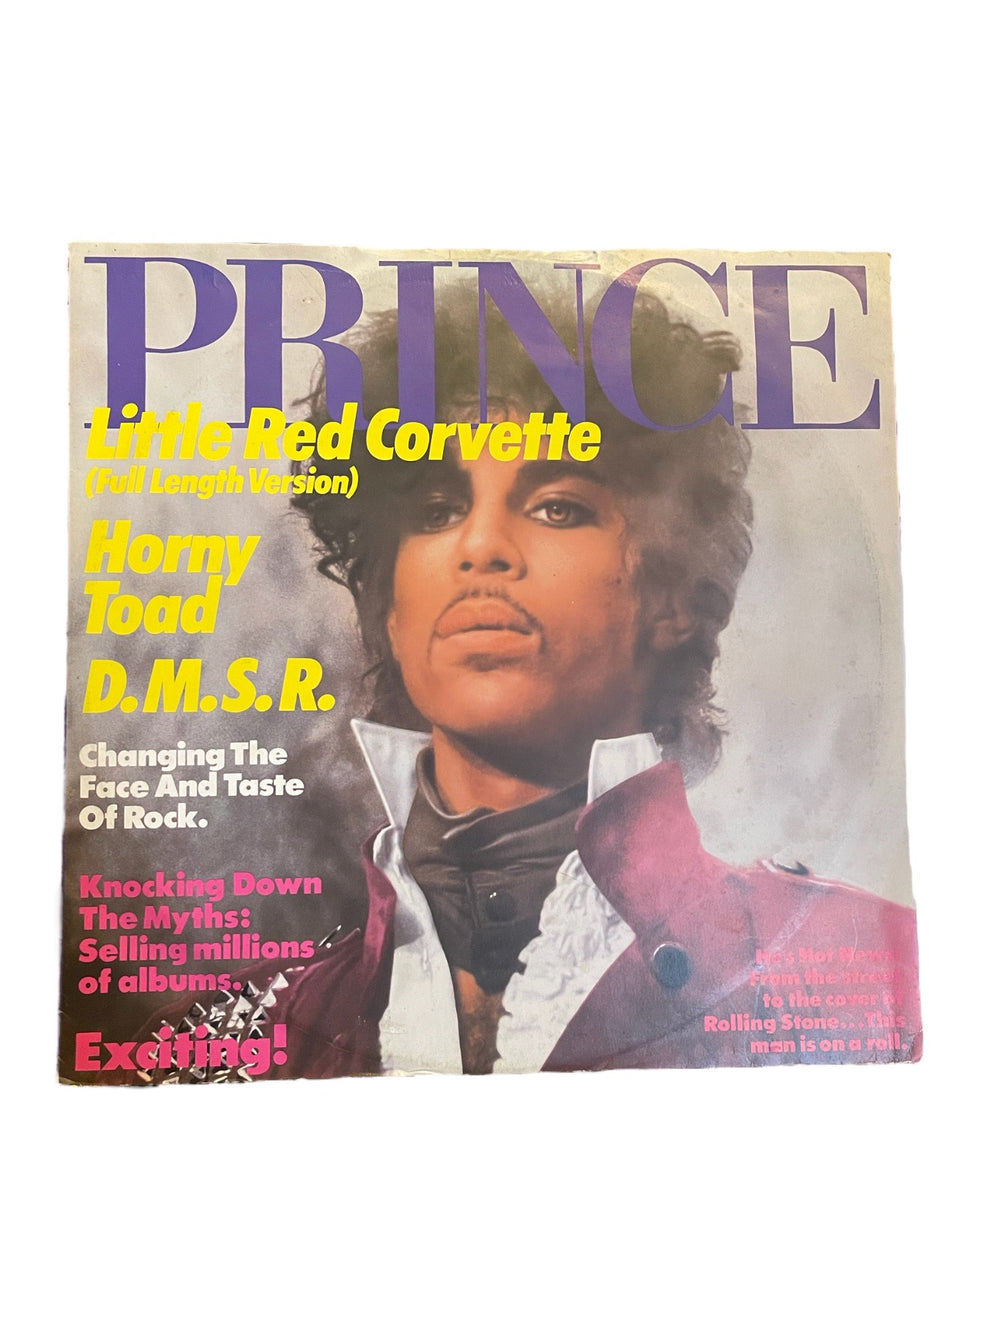 Prince – Little Red Corvette Horny Toad 12 Inch Vinyl Single UK W9436T Condition V Good